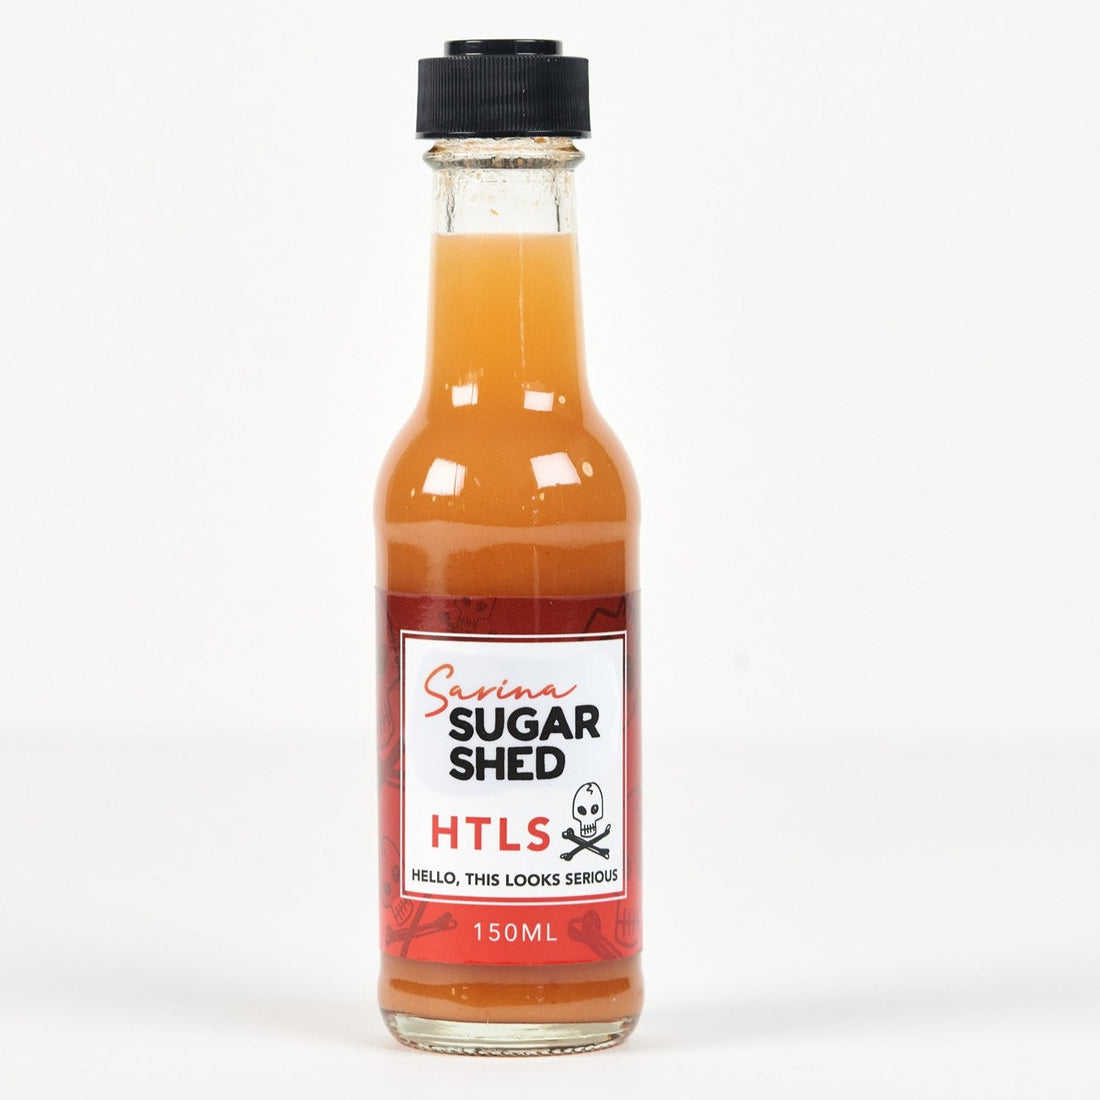 Sarina Sugar Shed HTLS (HELLO, This looks Serious) Chilli Sauce 150ml